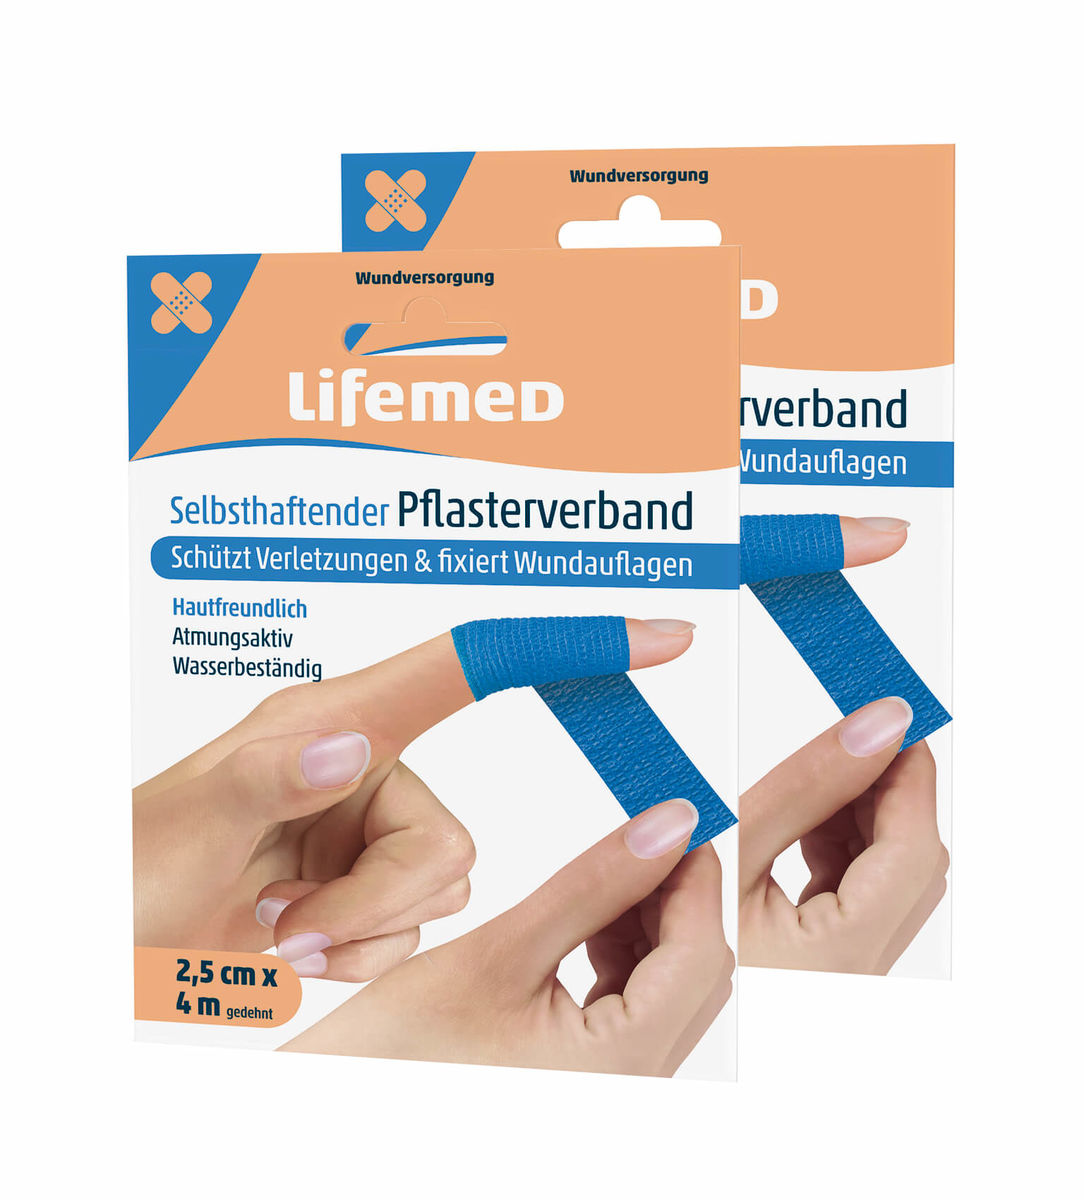 Image of Lifemed 2 Selbsthaftende Pflasterverbände 4 m x 2,5 cm bei nettoshop.ch